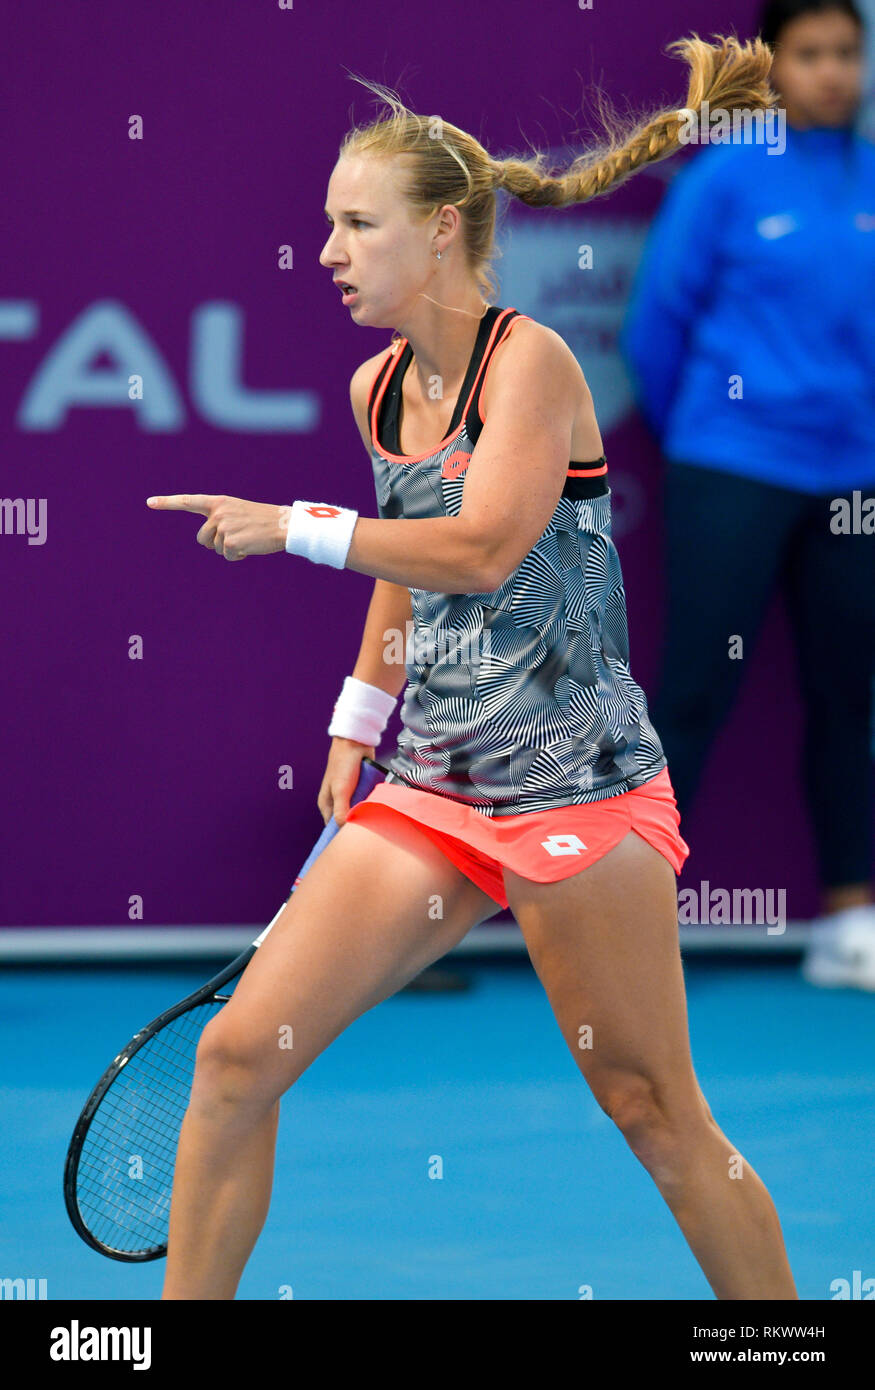 Doha, Qatar. 12th Feb, 2019. Anna Blinkova of Russia reacts during the  women's singles first round match between Anna Blinkova of Russia and  Anastasija Sevastova of Latvia at the 2019 WTA Qatar